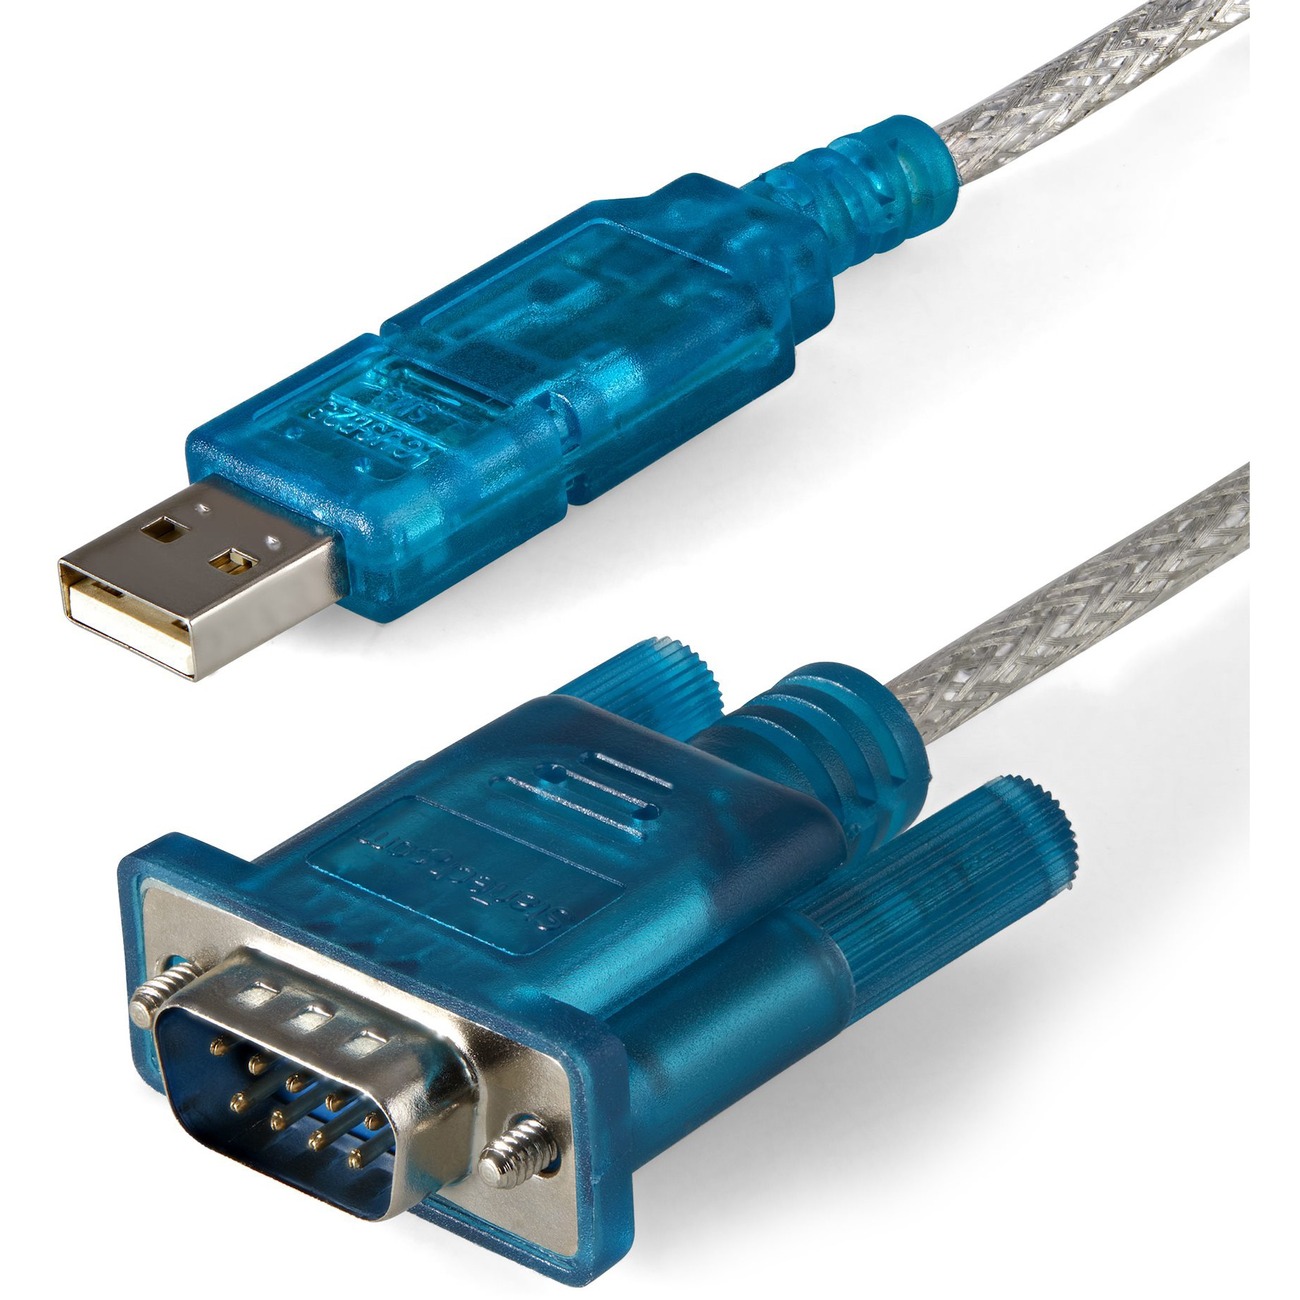 StarTech.com USB to Serial Adapter ? Prolific PL-2303 3 ft / 1m DB9 (9-pin) ? USB to RS232 Adapter ? USB Serial - an RS232 serial port to